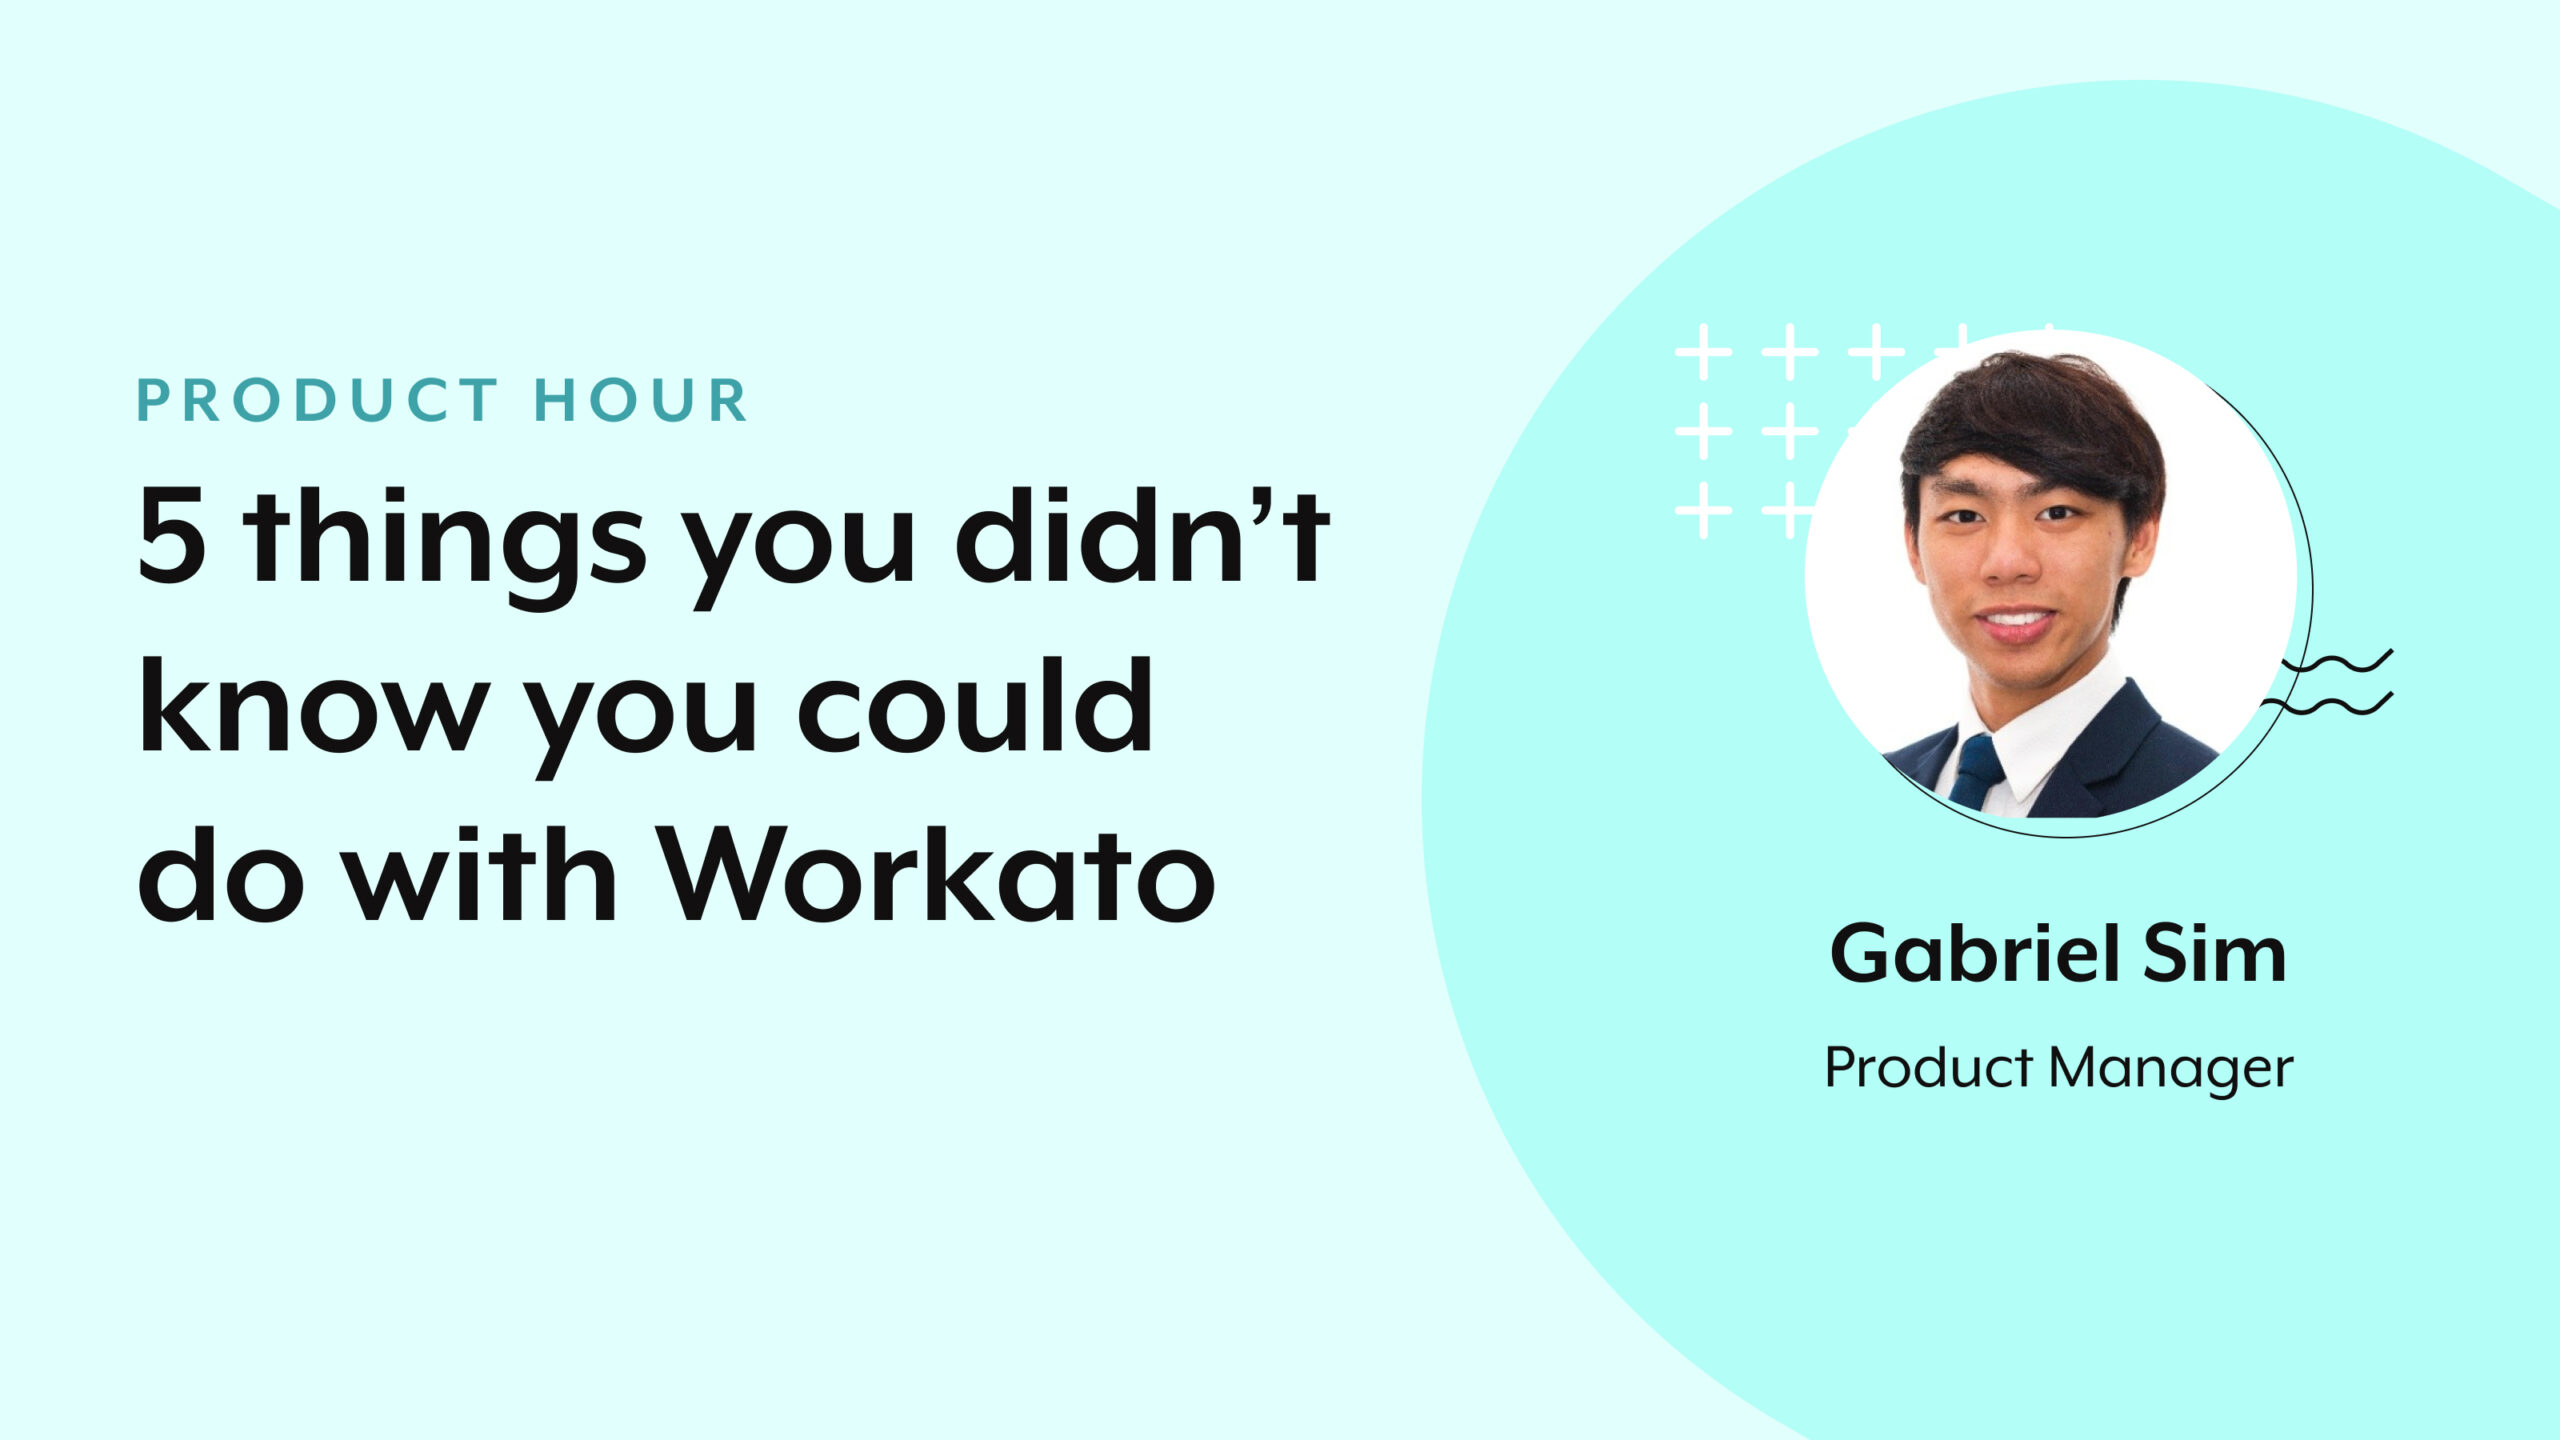 5 things you didn't know you could do with Workato